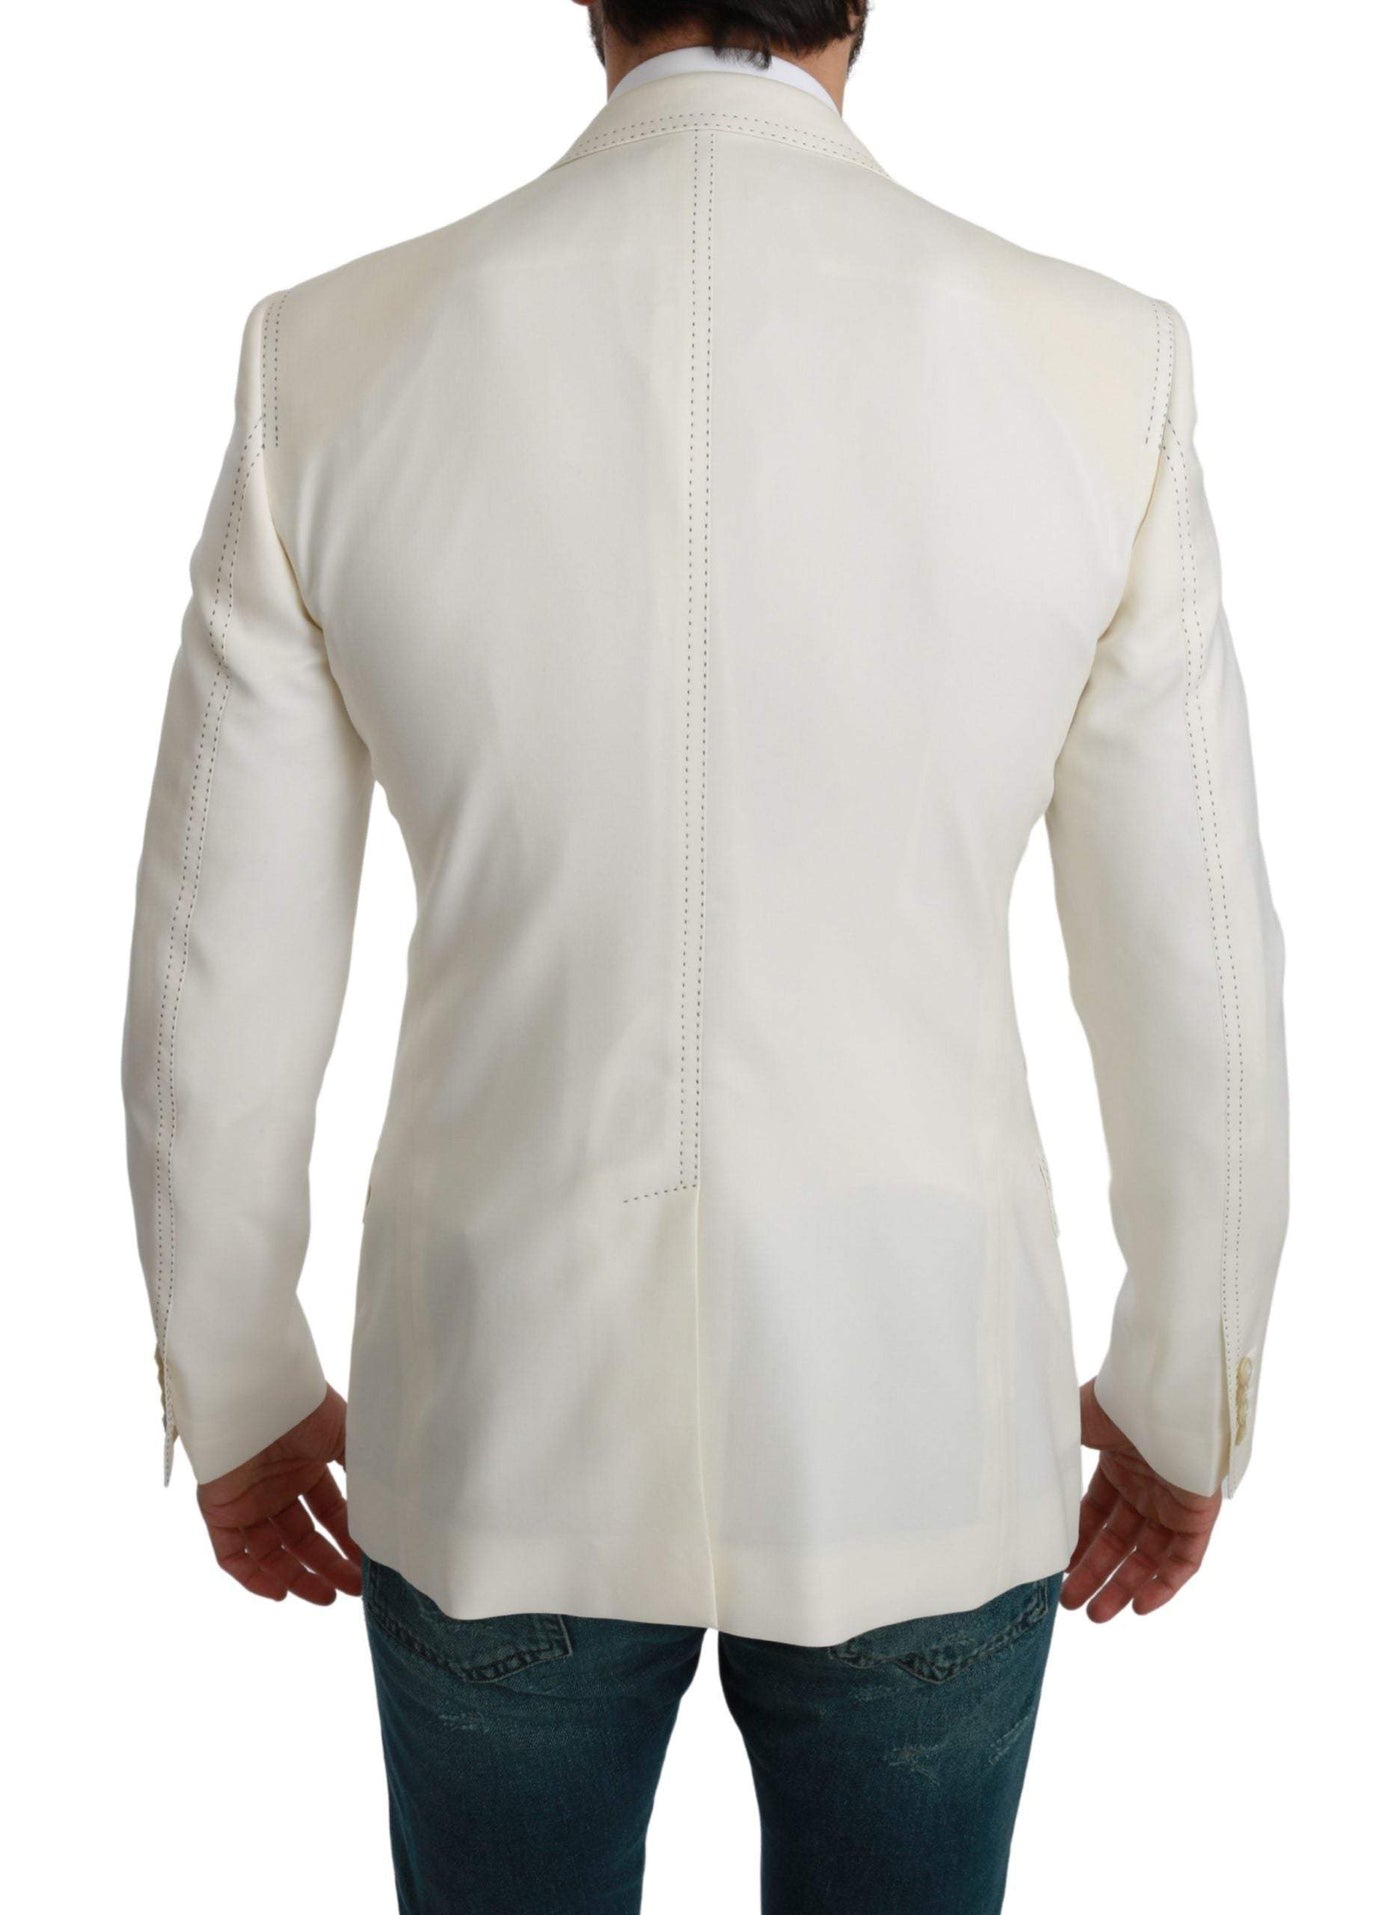 Dolce & Gabbana SICILIA Cream Single Breasted Formal Blazer #men, Blazers - Men - Clothing, Dolce & Gabbana, feed-agegroup-adult, feed-color-White, feed-gender-male, IT46 | S, Men - New Arrivals, White at SEYMAYKA